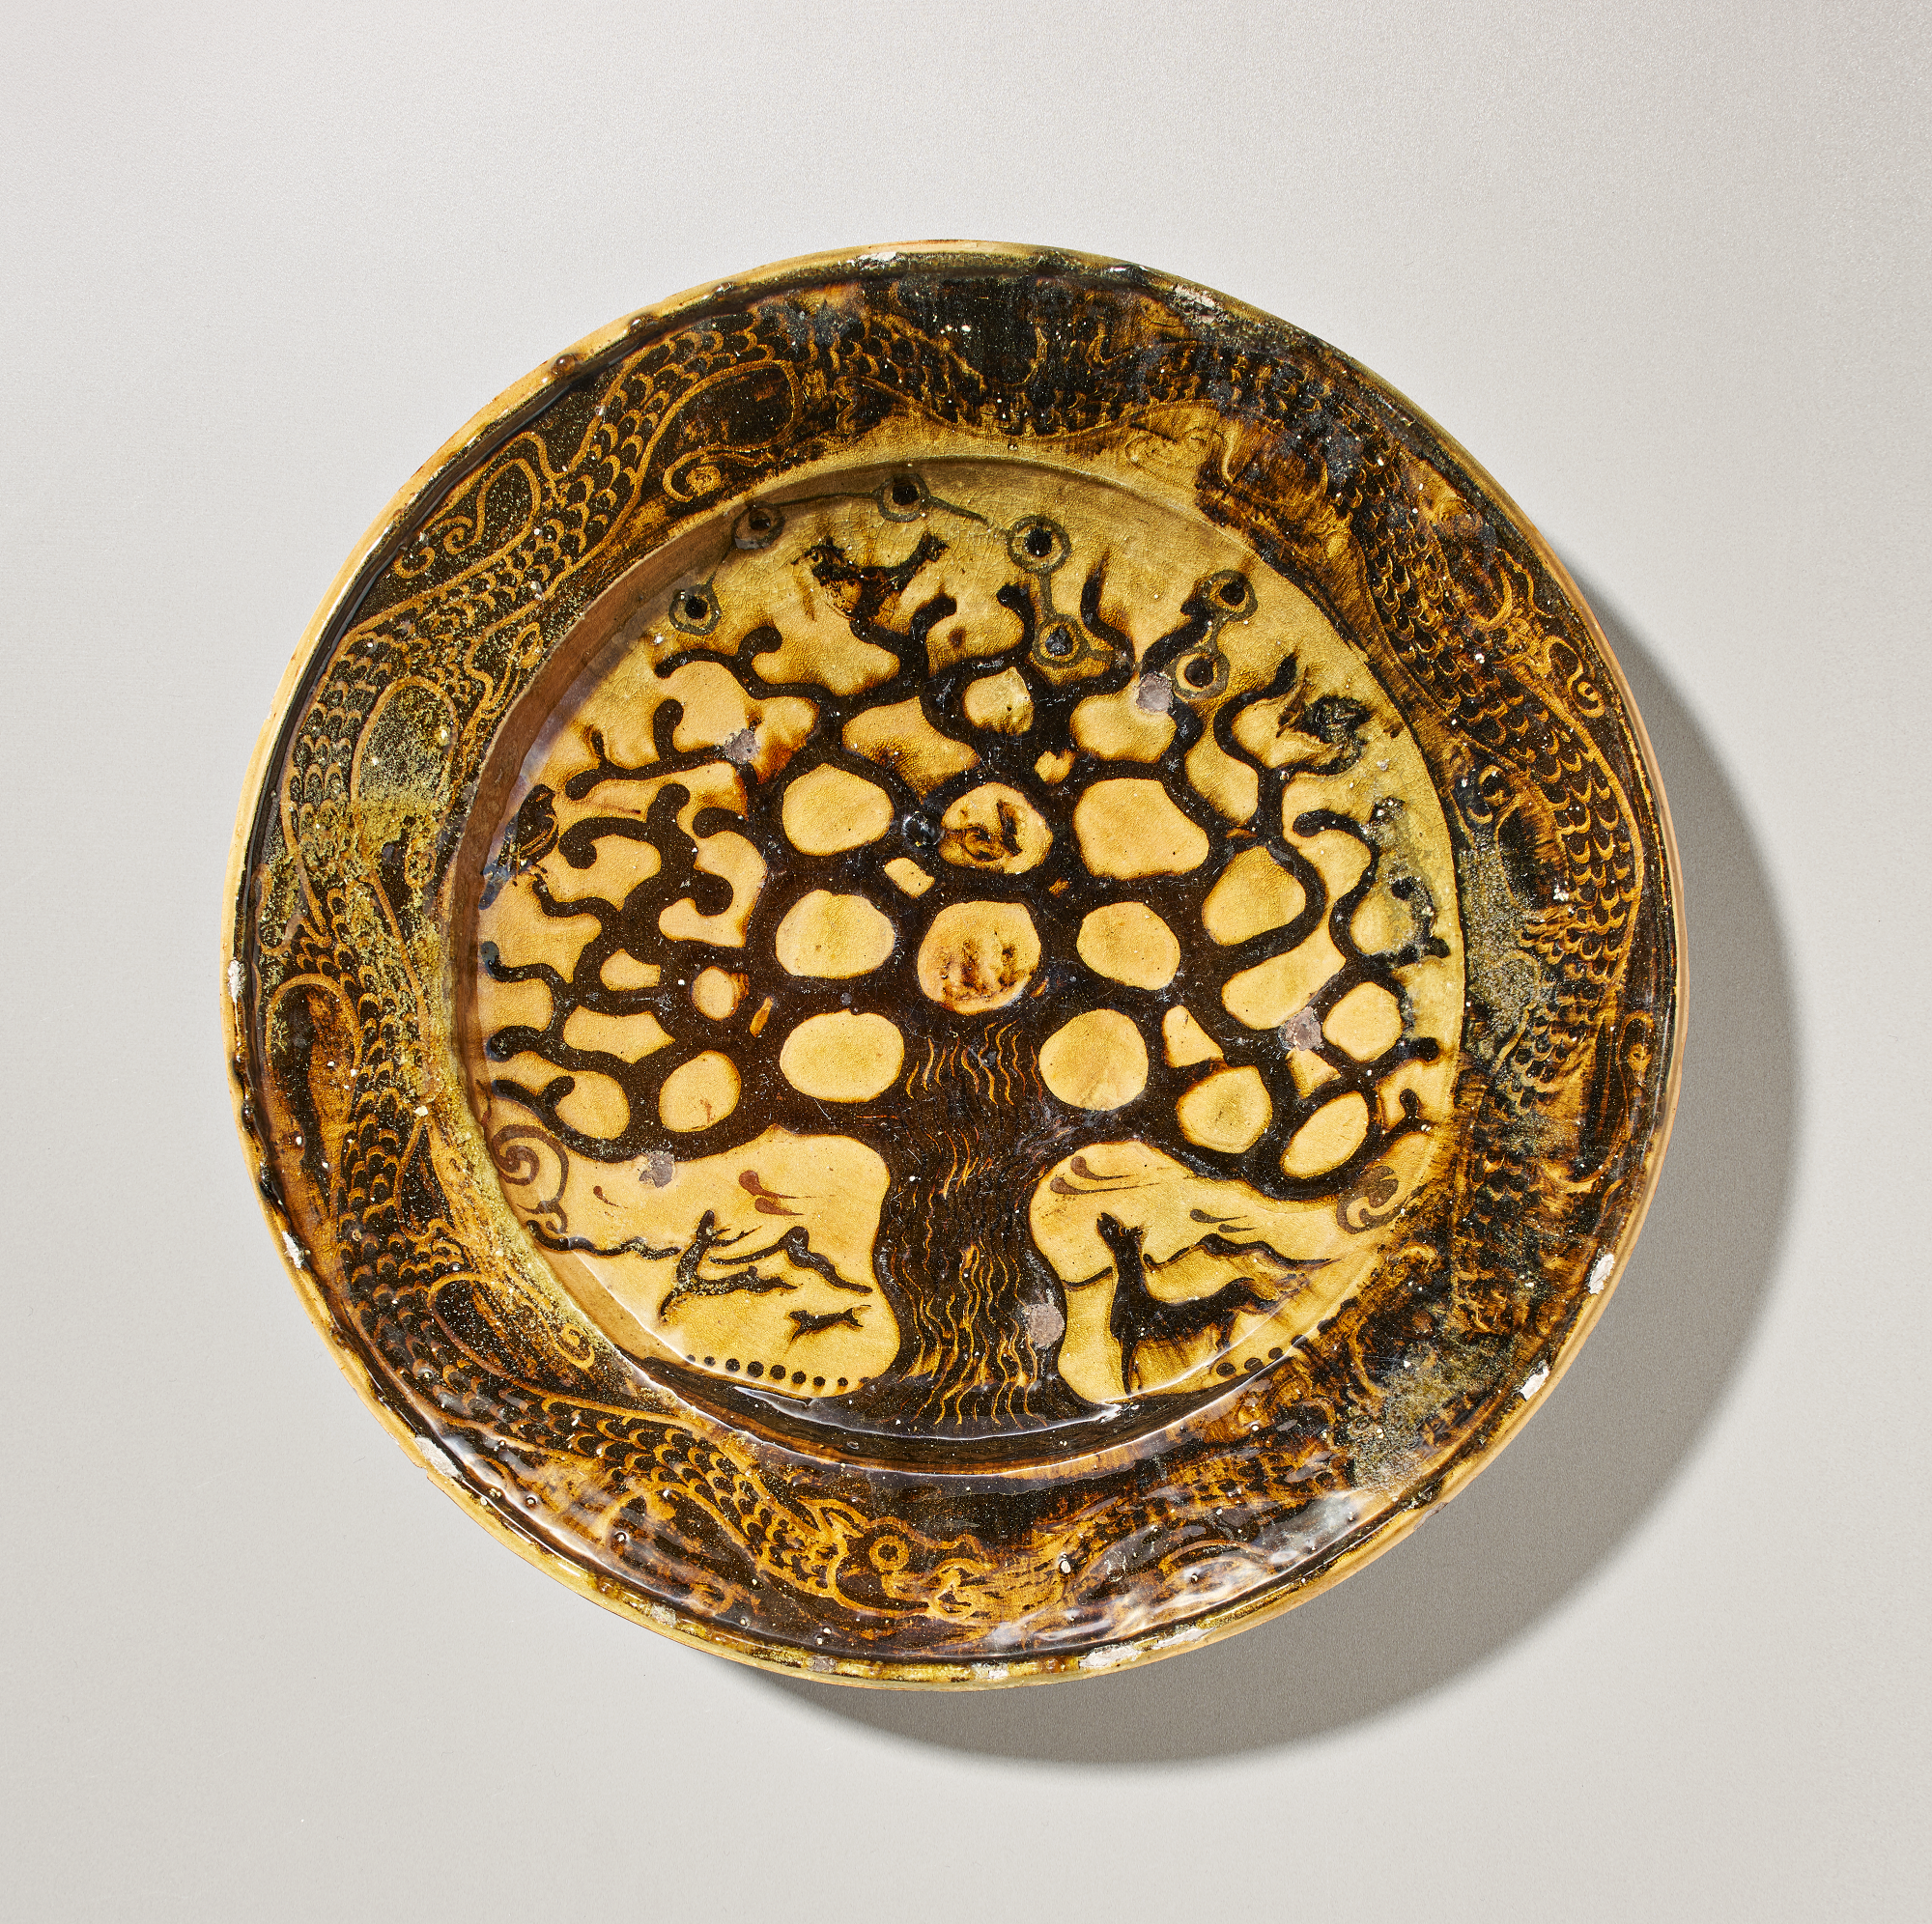 An earthenware charger with 'Tree of Life' design made by Bernard Leach in circa 1924 sold at auction by Phillips in association with Maak